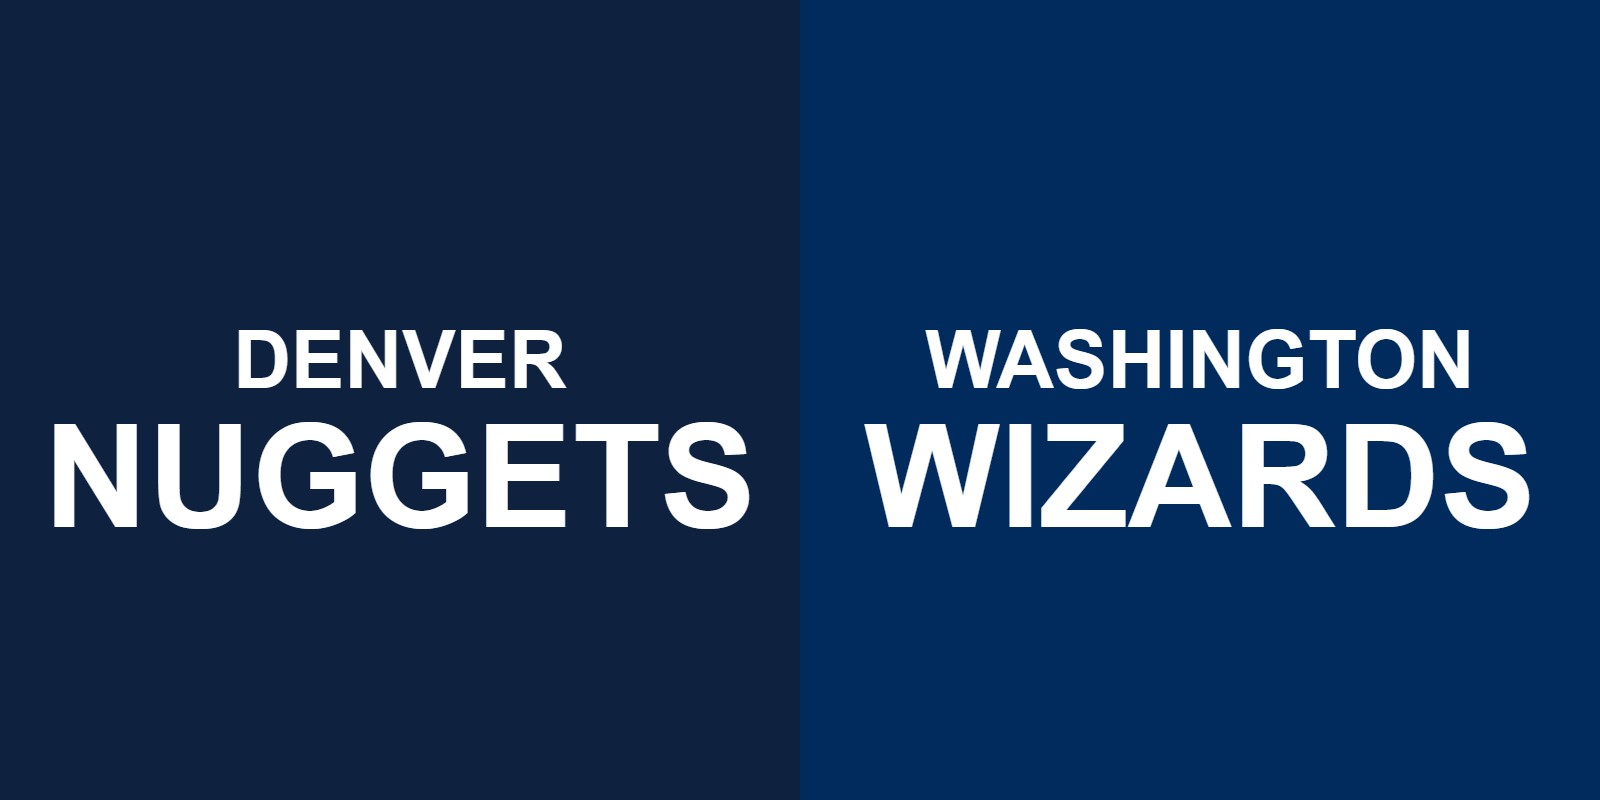 Nuggets vs Wizards